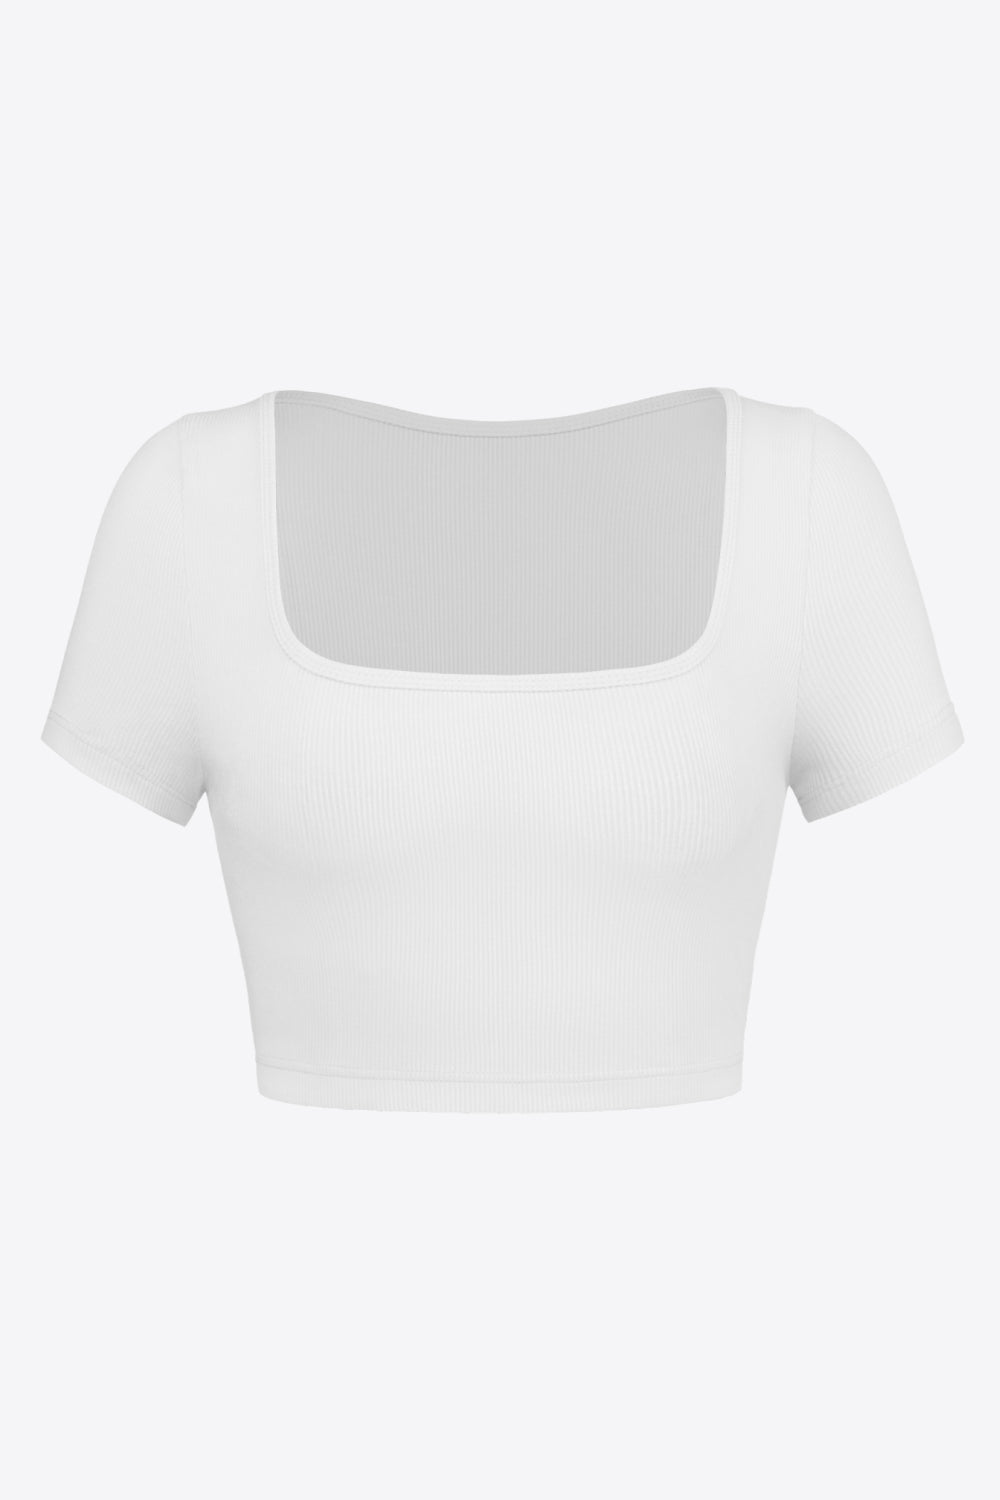 Square Neck Ribbed Crop Top - Women’s Clothing & Accessories - Shirts & Tops - 8 - 2024